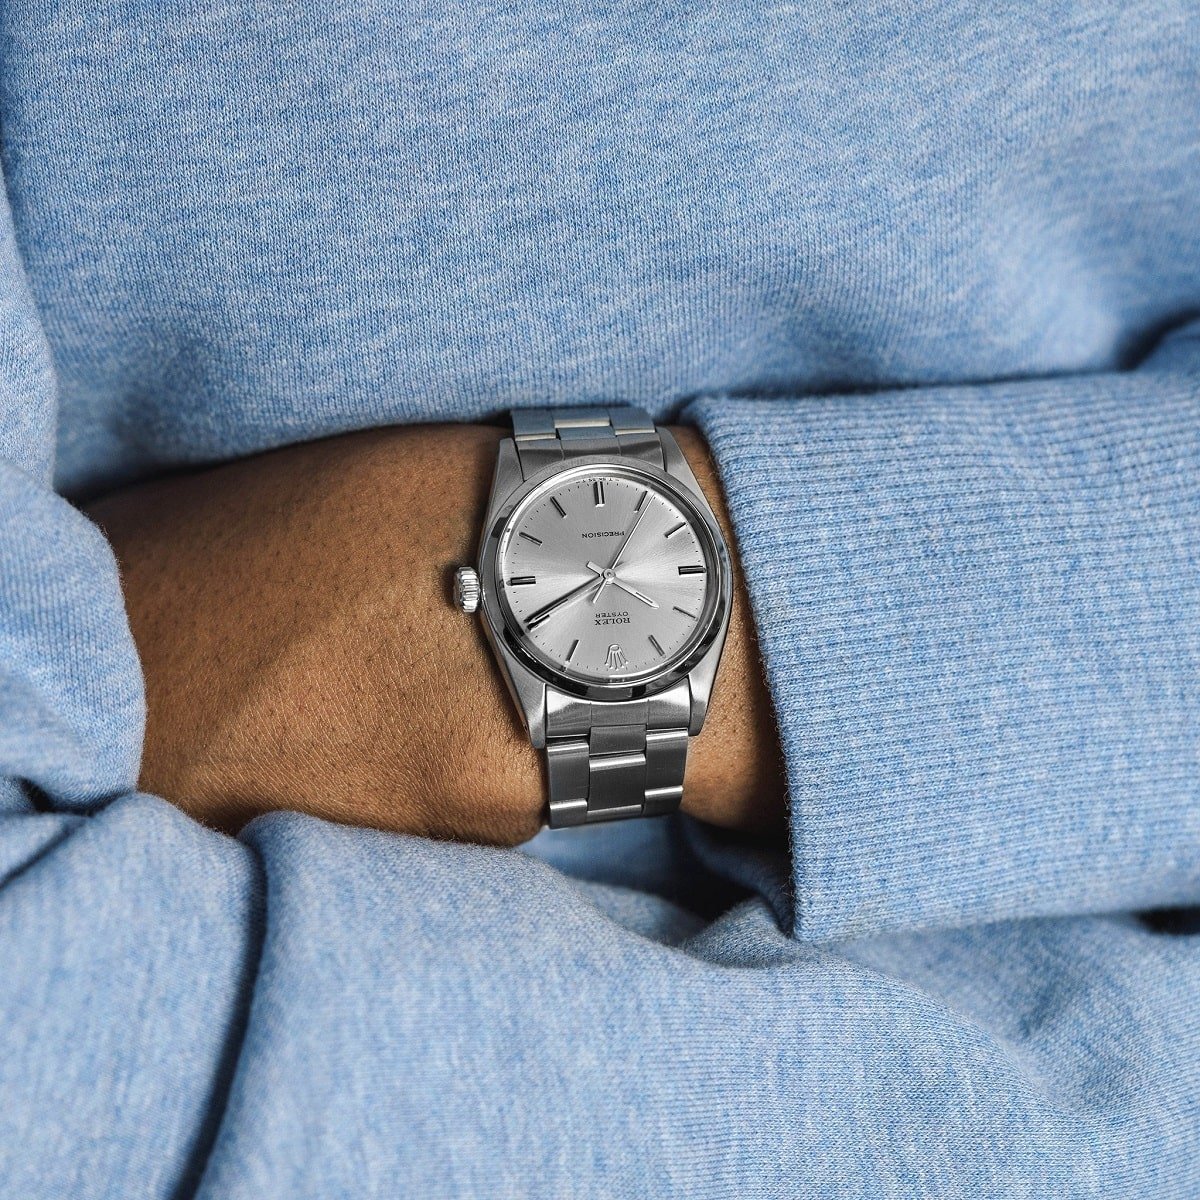 Why the Cheapest Rolex Watches Are Still Worth the Investment